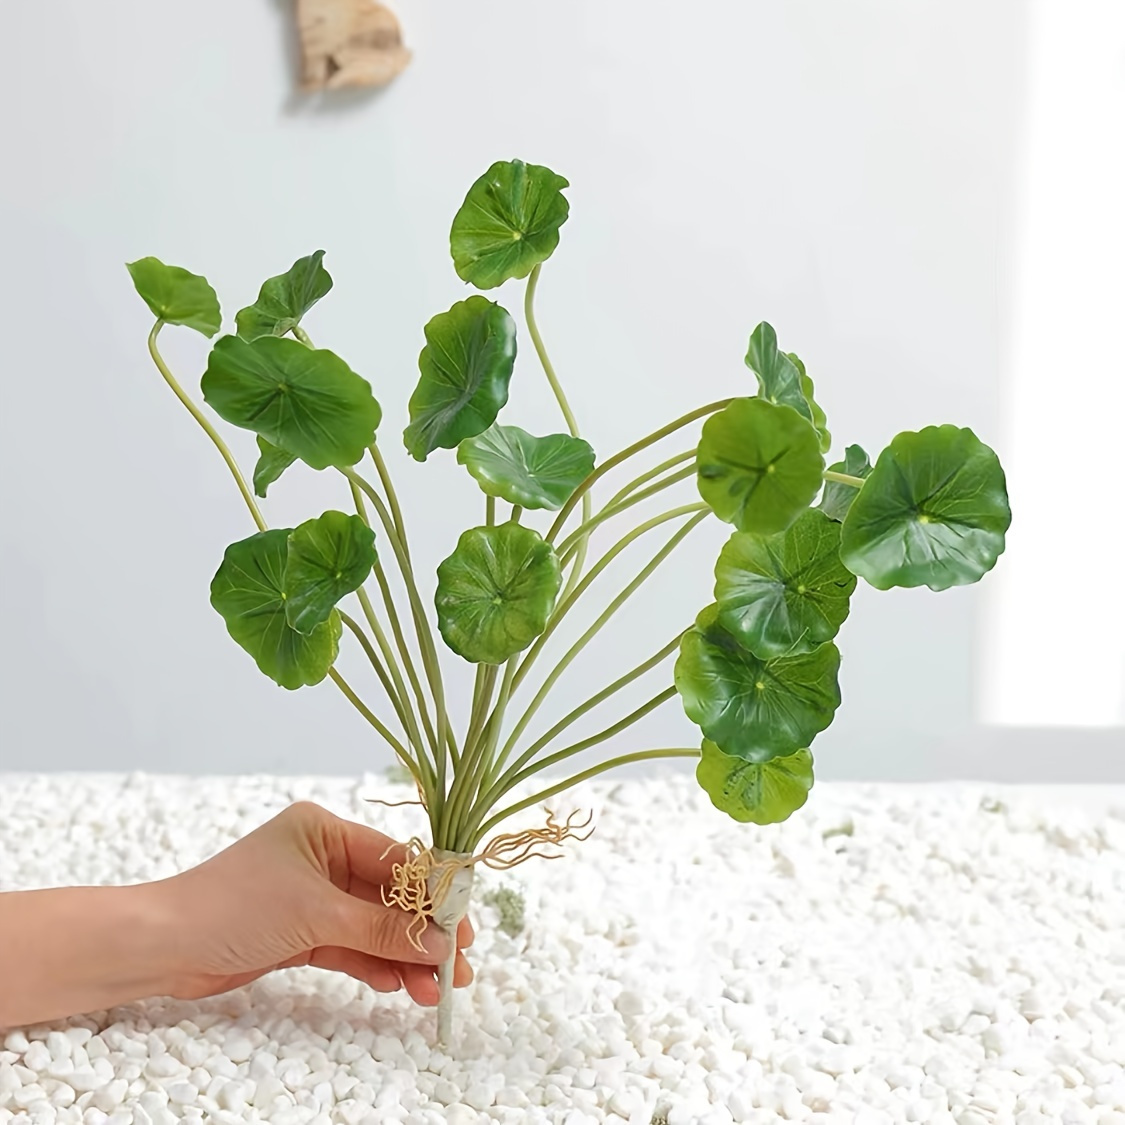 

1pc Artificial Green Leaf Plant For Home Decor - Faux Plants For Desk, Shelf, And Office Room Decoration - 15.3in